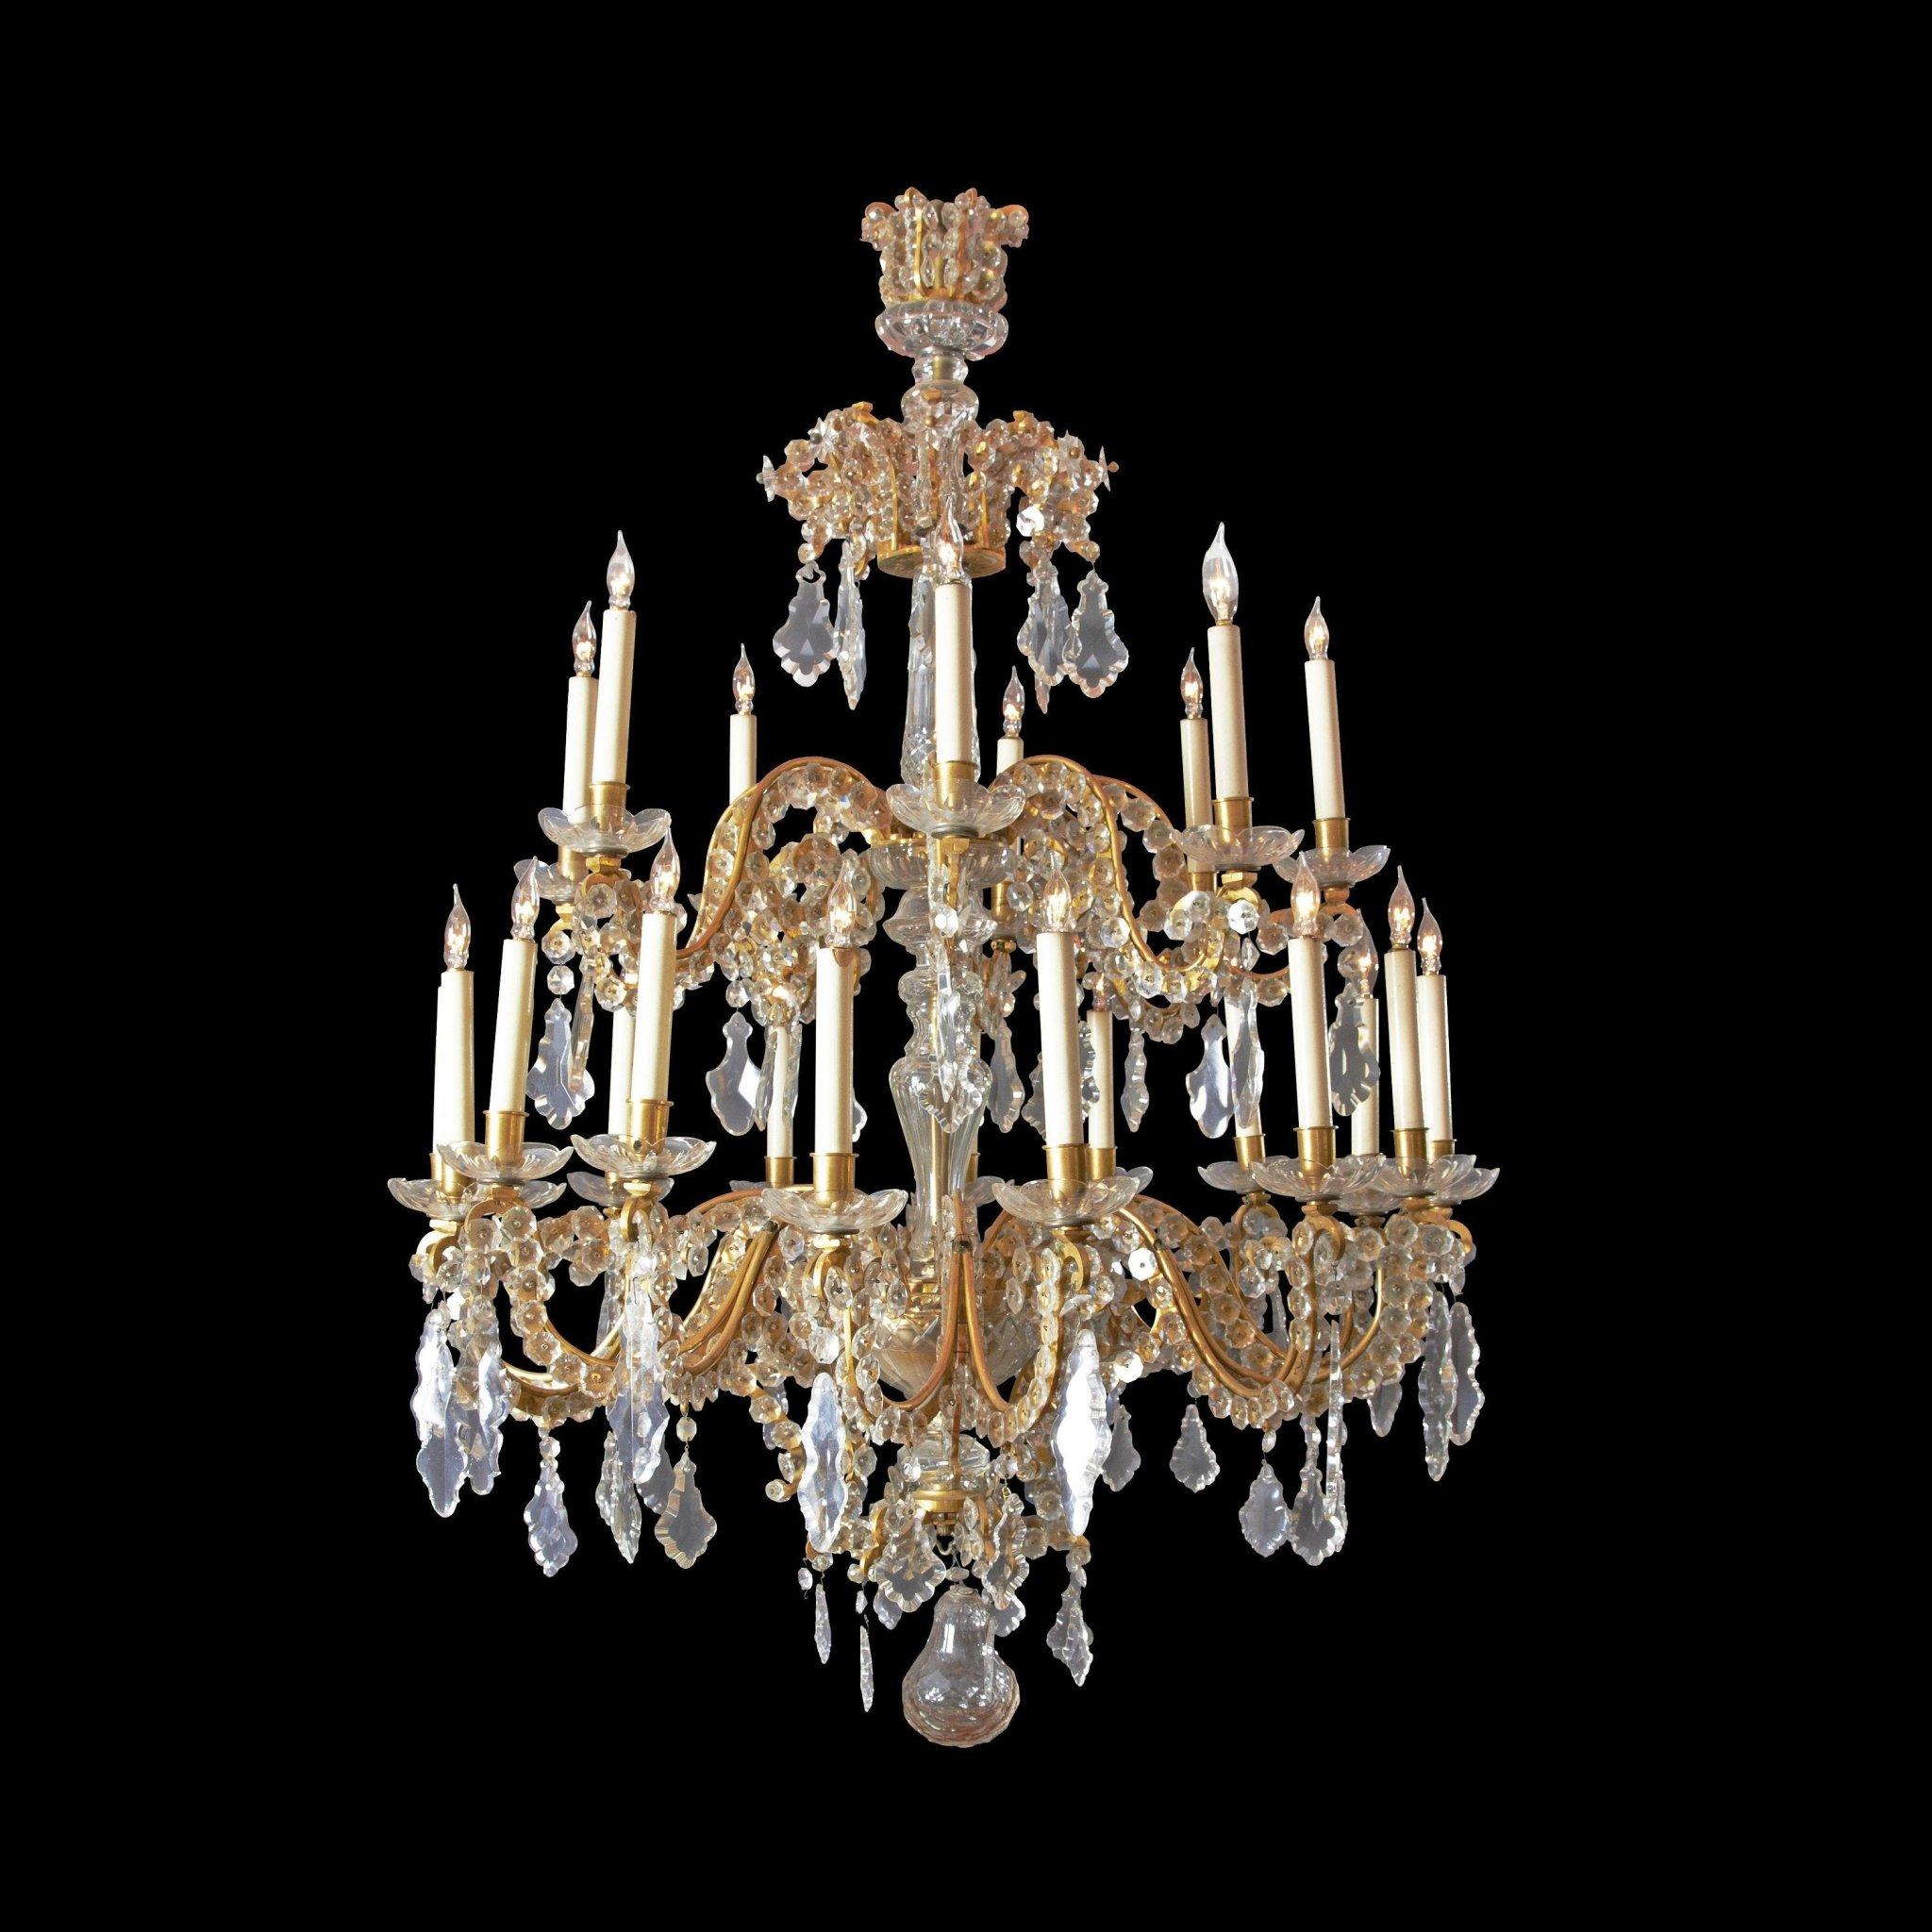 Fine Louis XV crystal and bronze 24-light two-tier chandelier, mid-19th century.